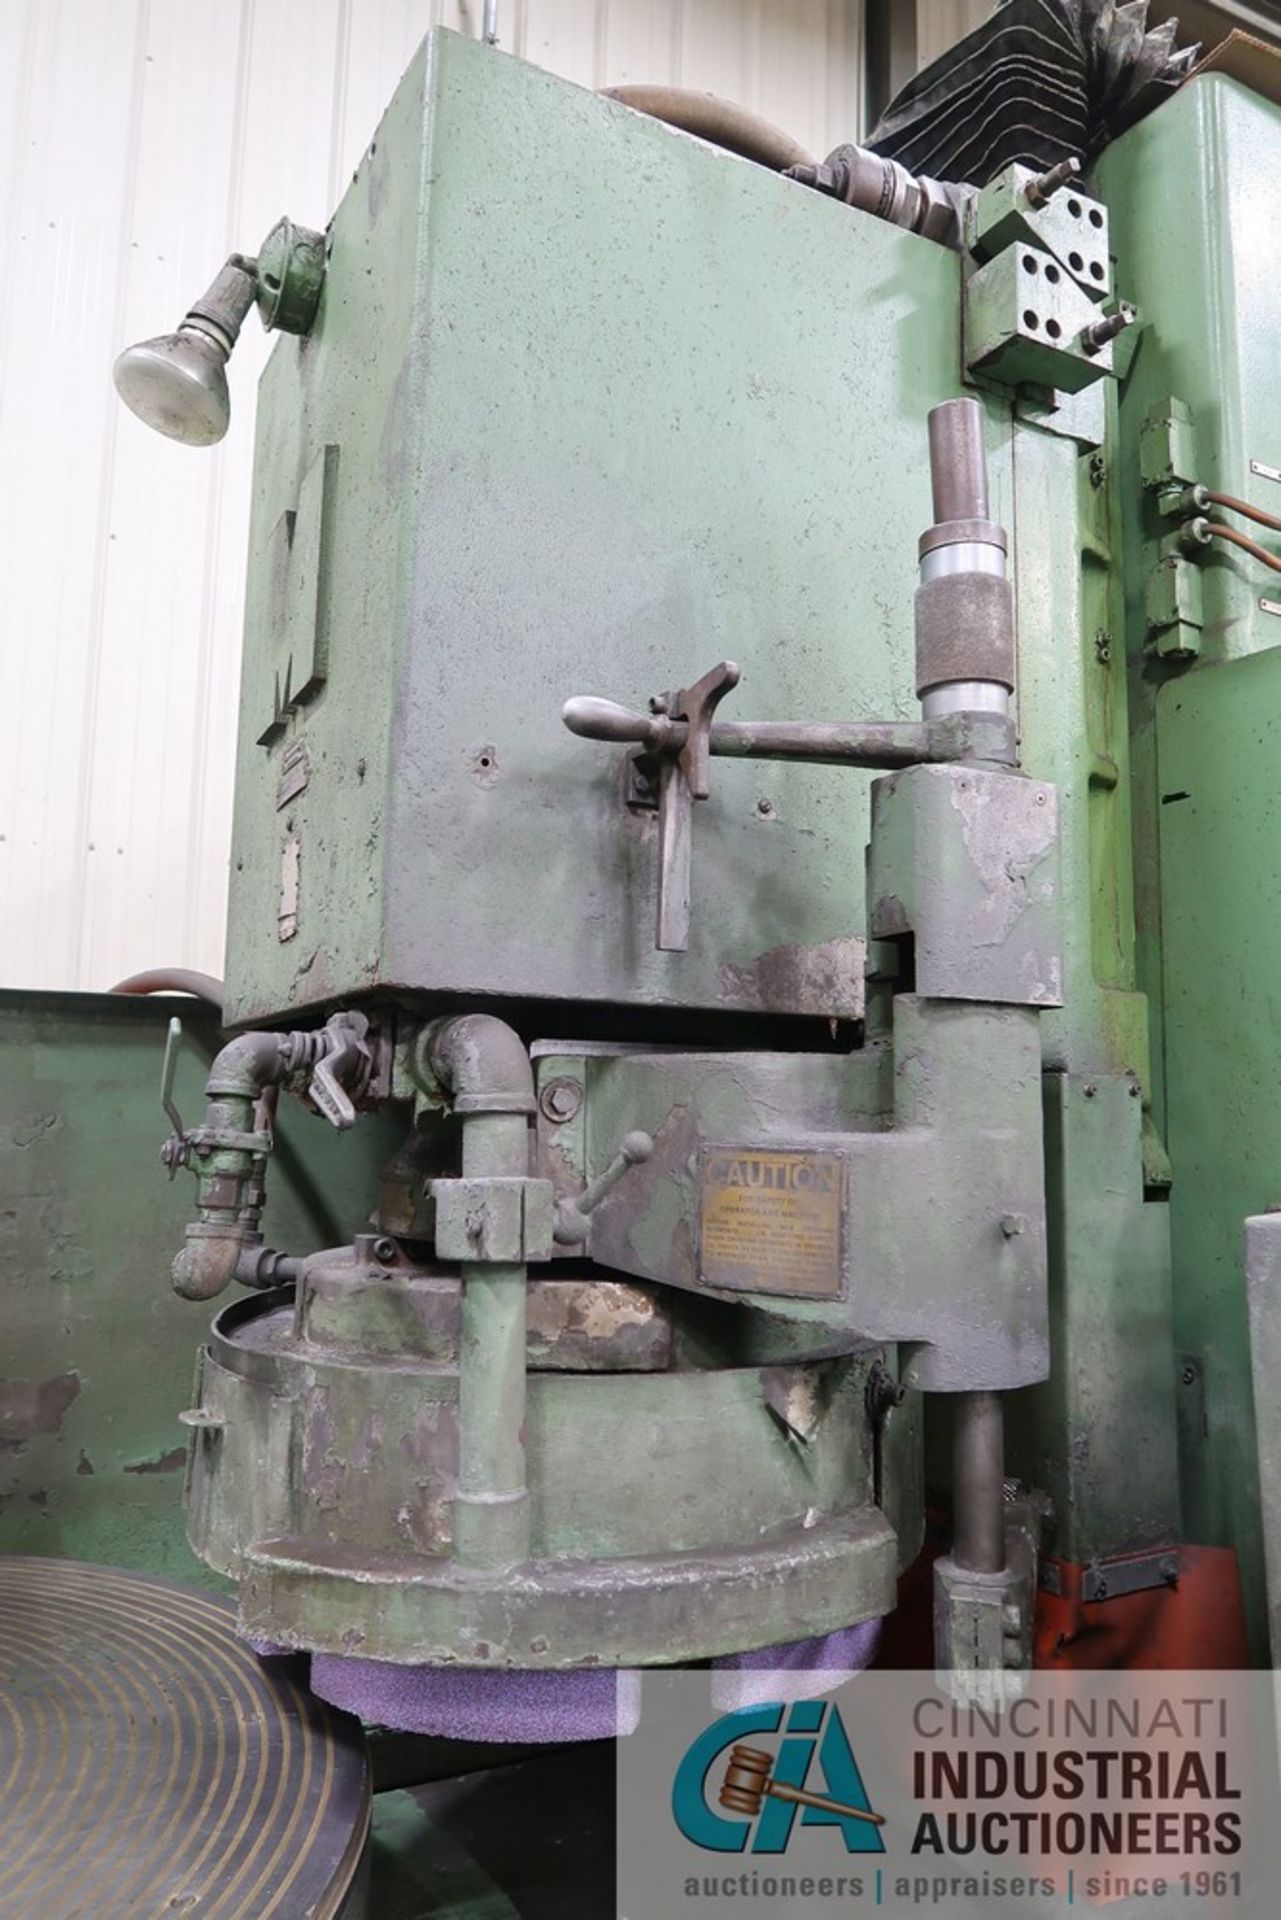 48" DIAMETER MATTISON ROTARY TABLE SURFACE GRINDER; S/N 24-799, 75 HP MOTOR, COOLANT FILTRATION, - Image 5 of 16